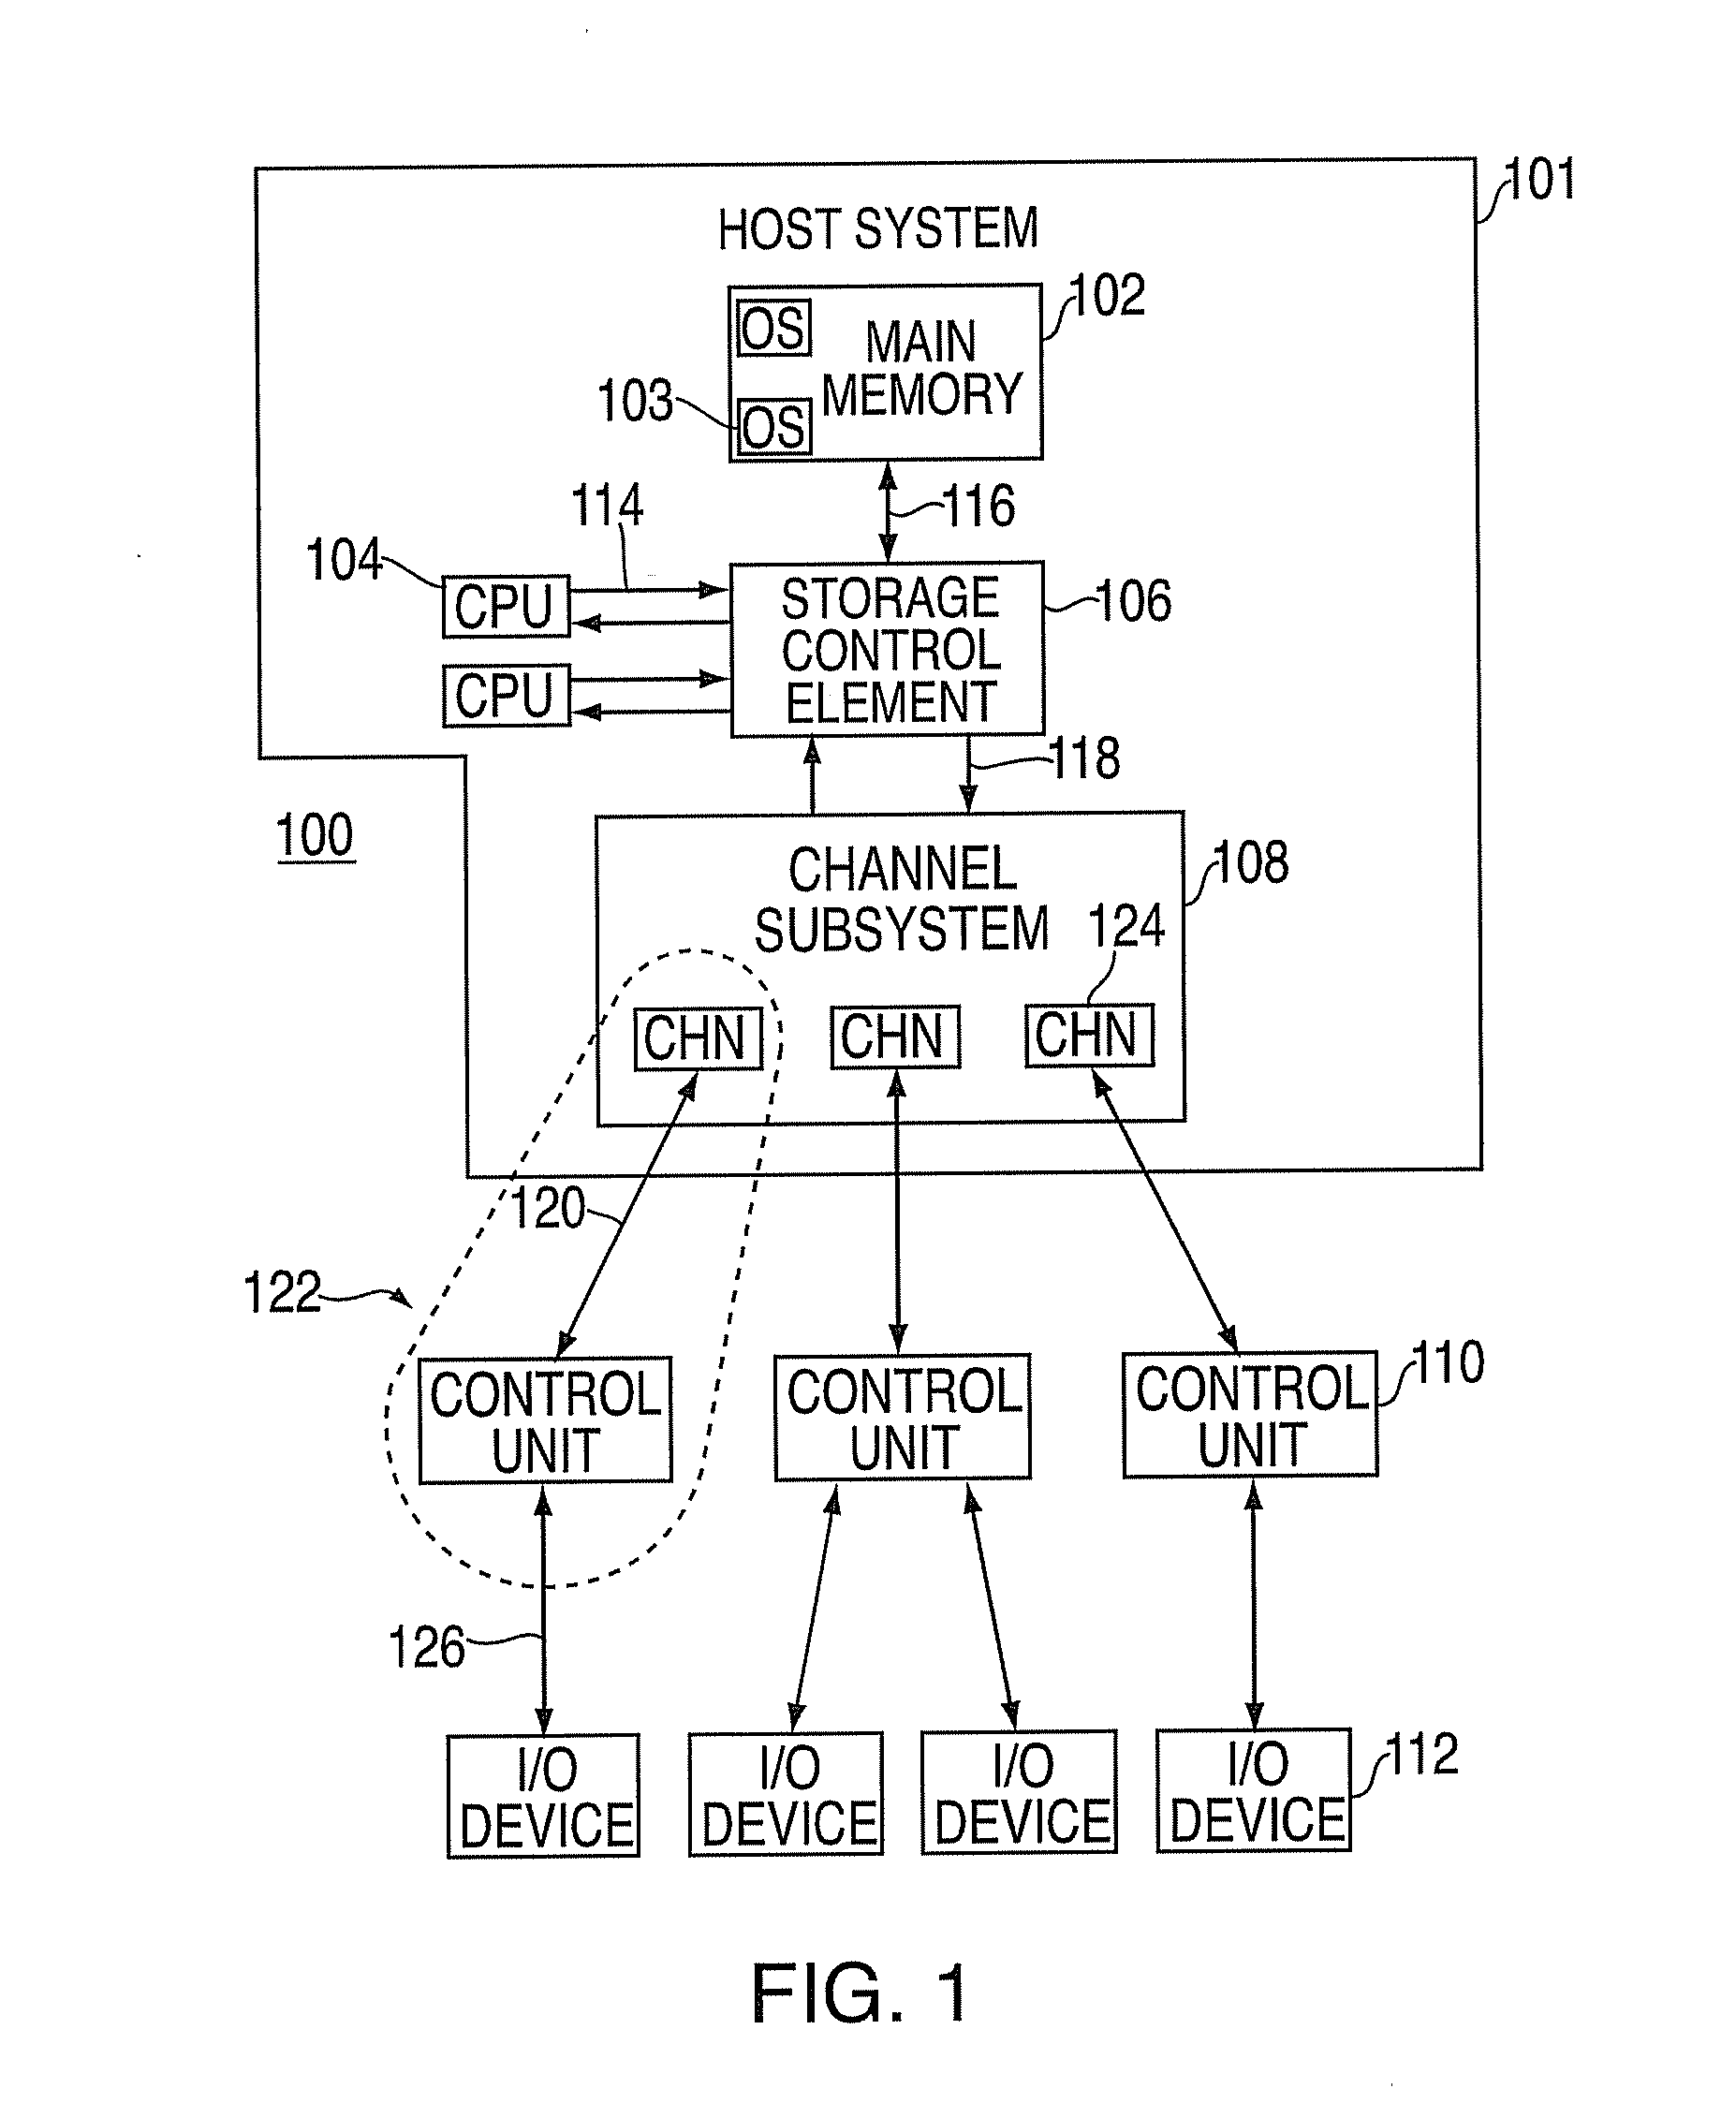 Exception condition determination at a control unit in an I/O processing system